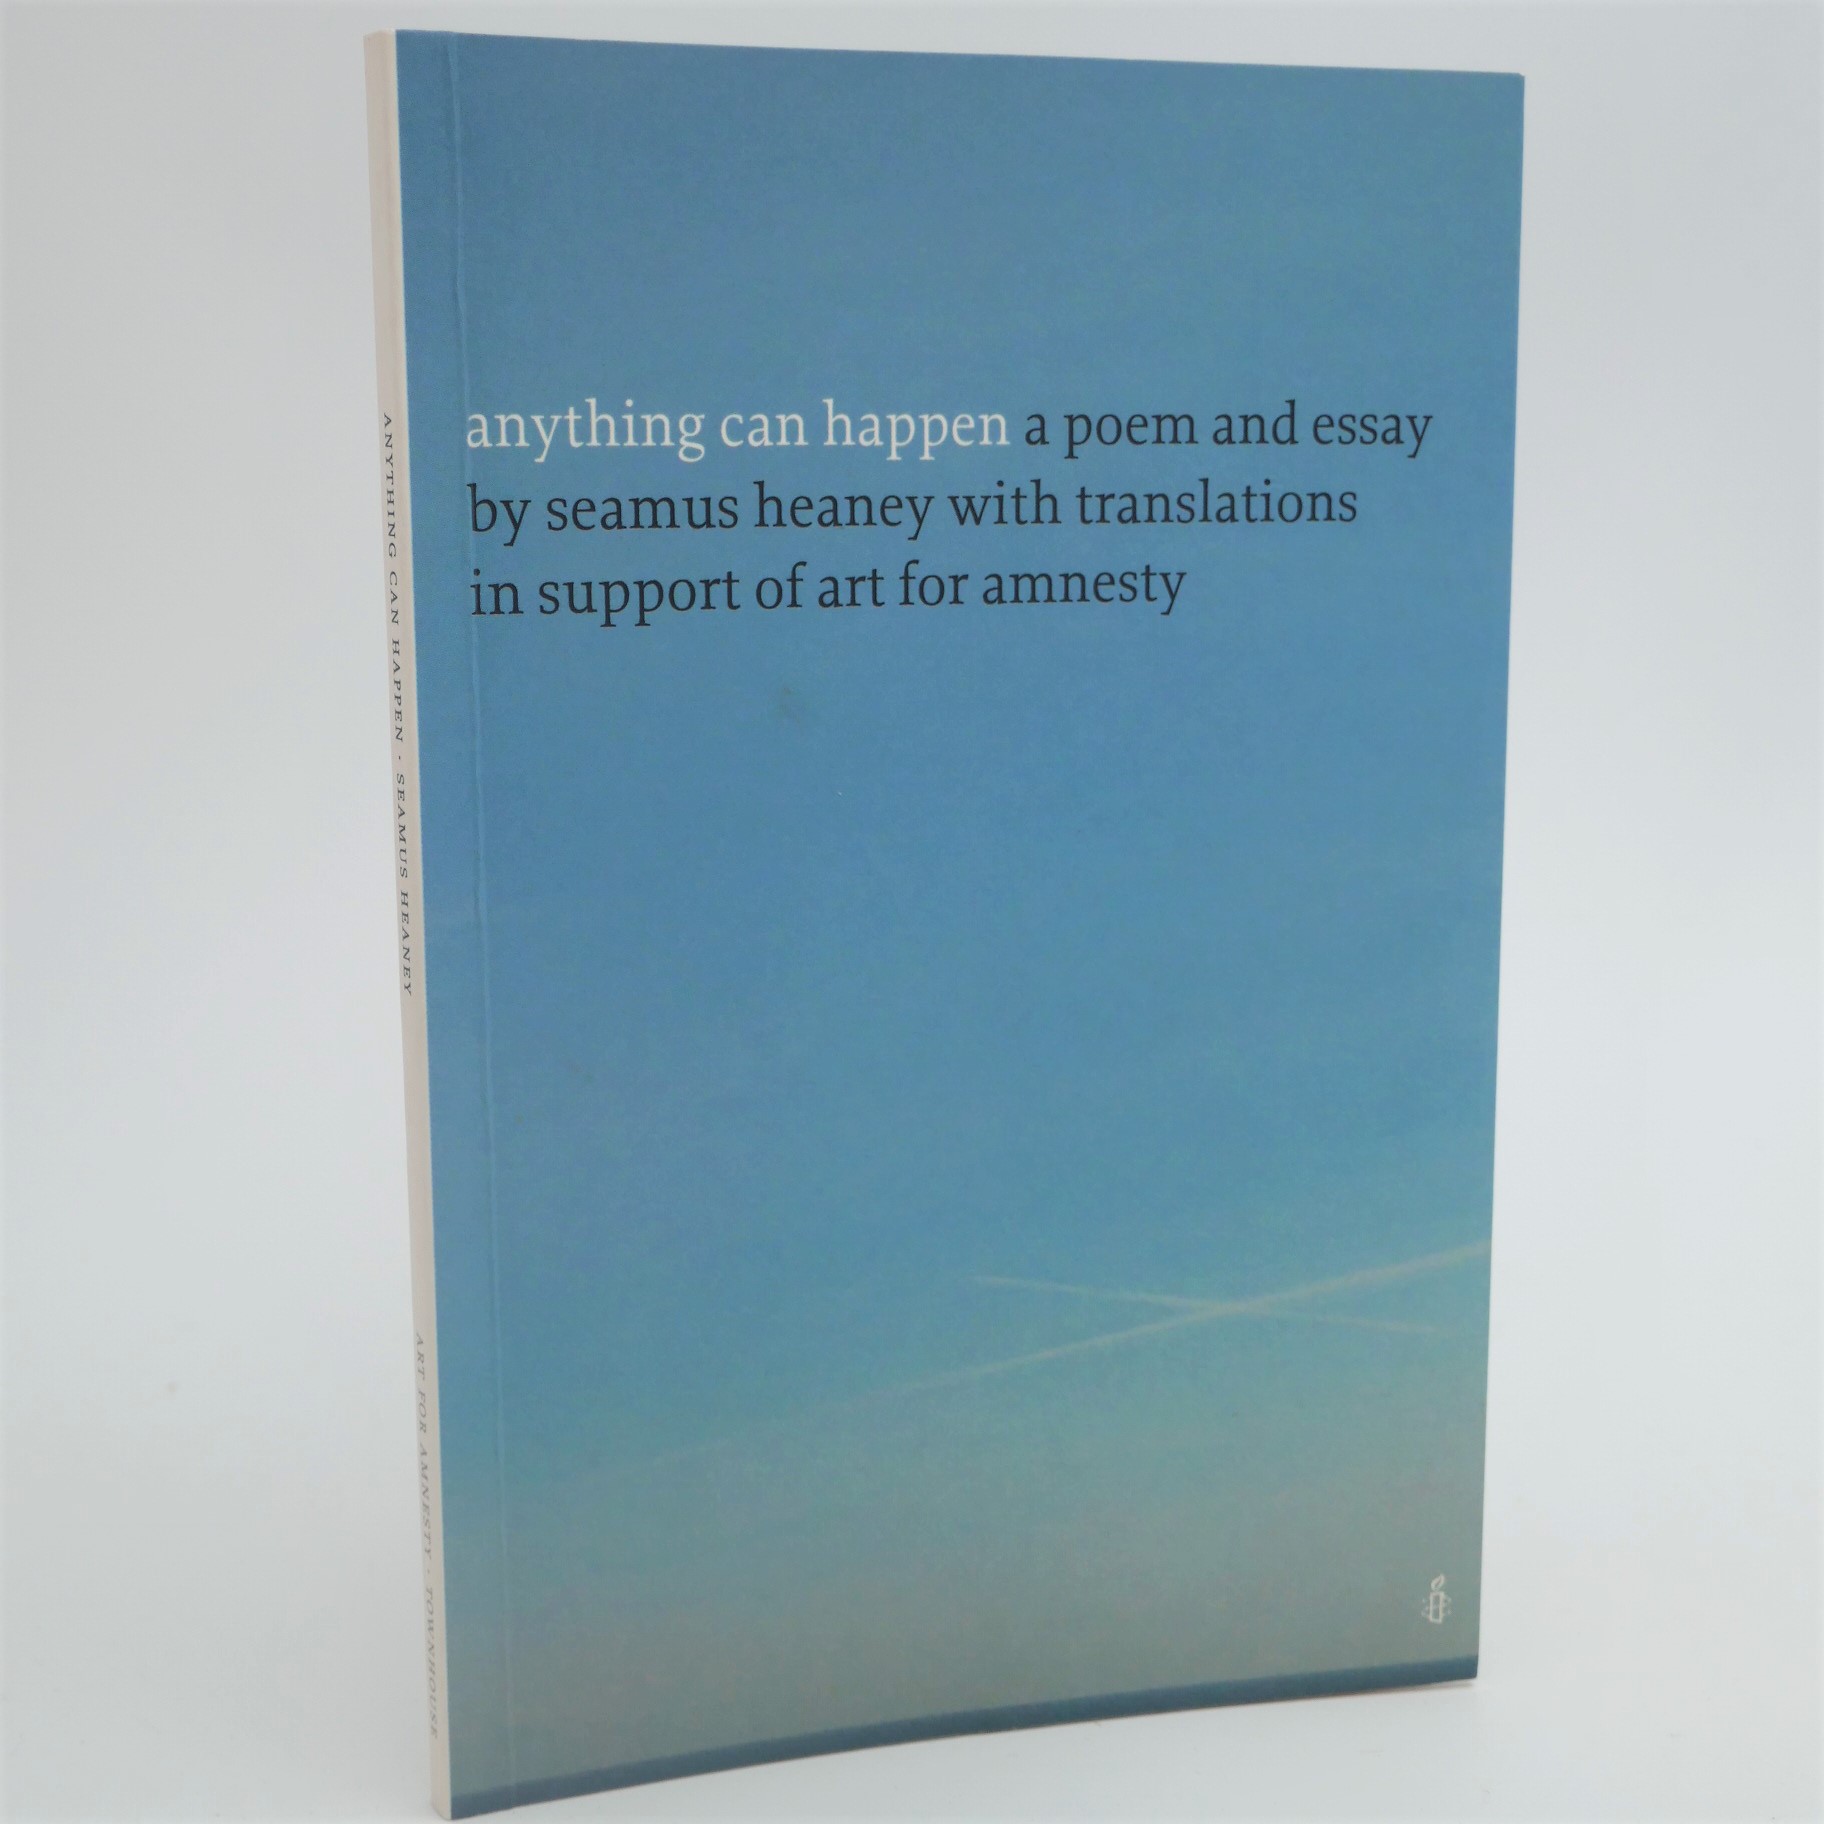 Anything Can Happen. Signed Copy (2004) by Seamus Heaney